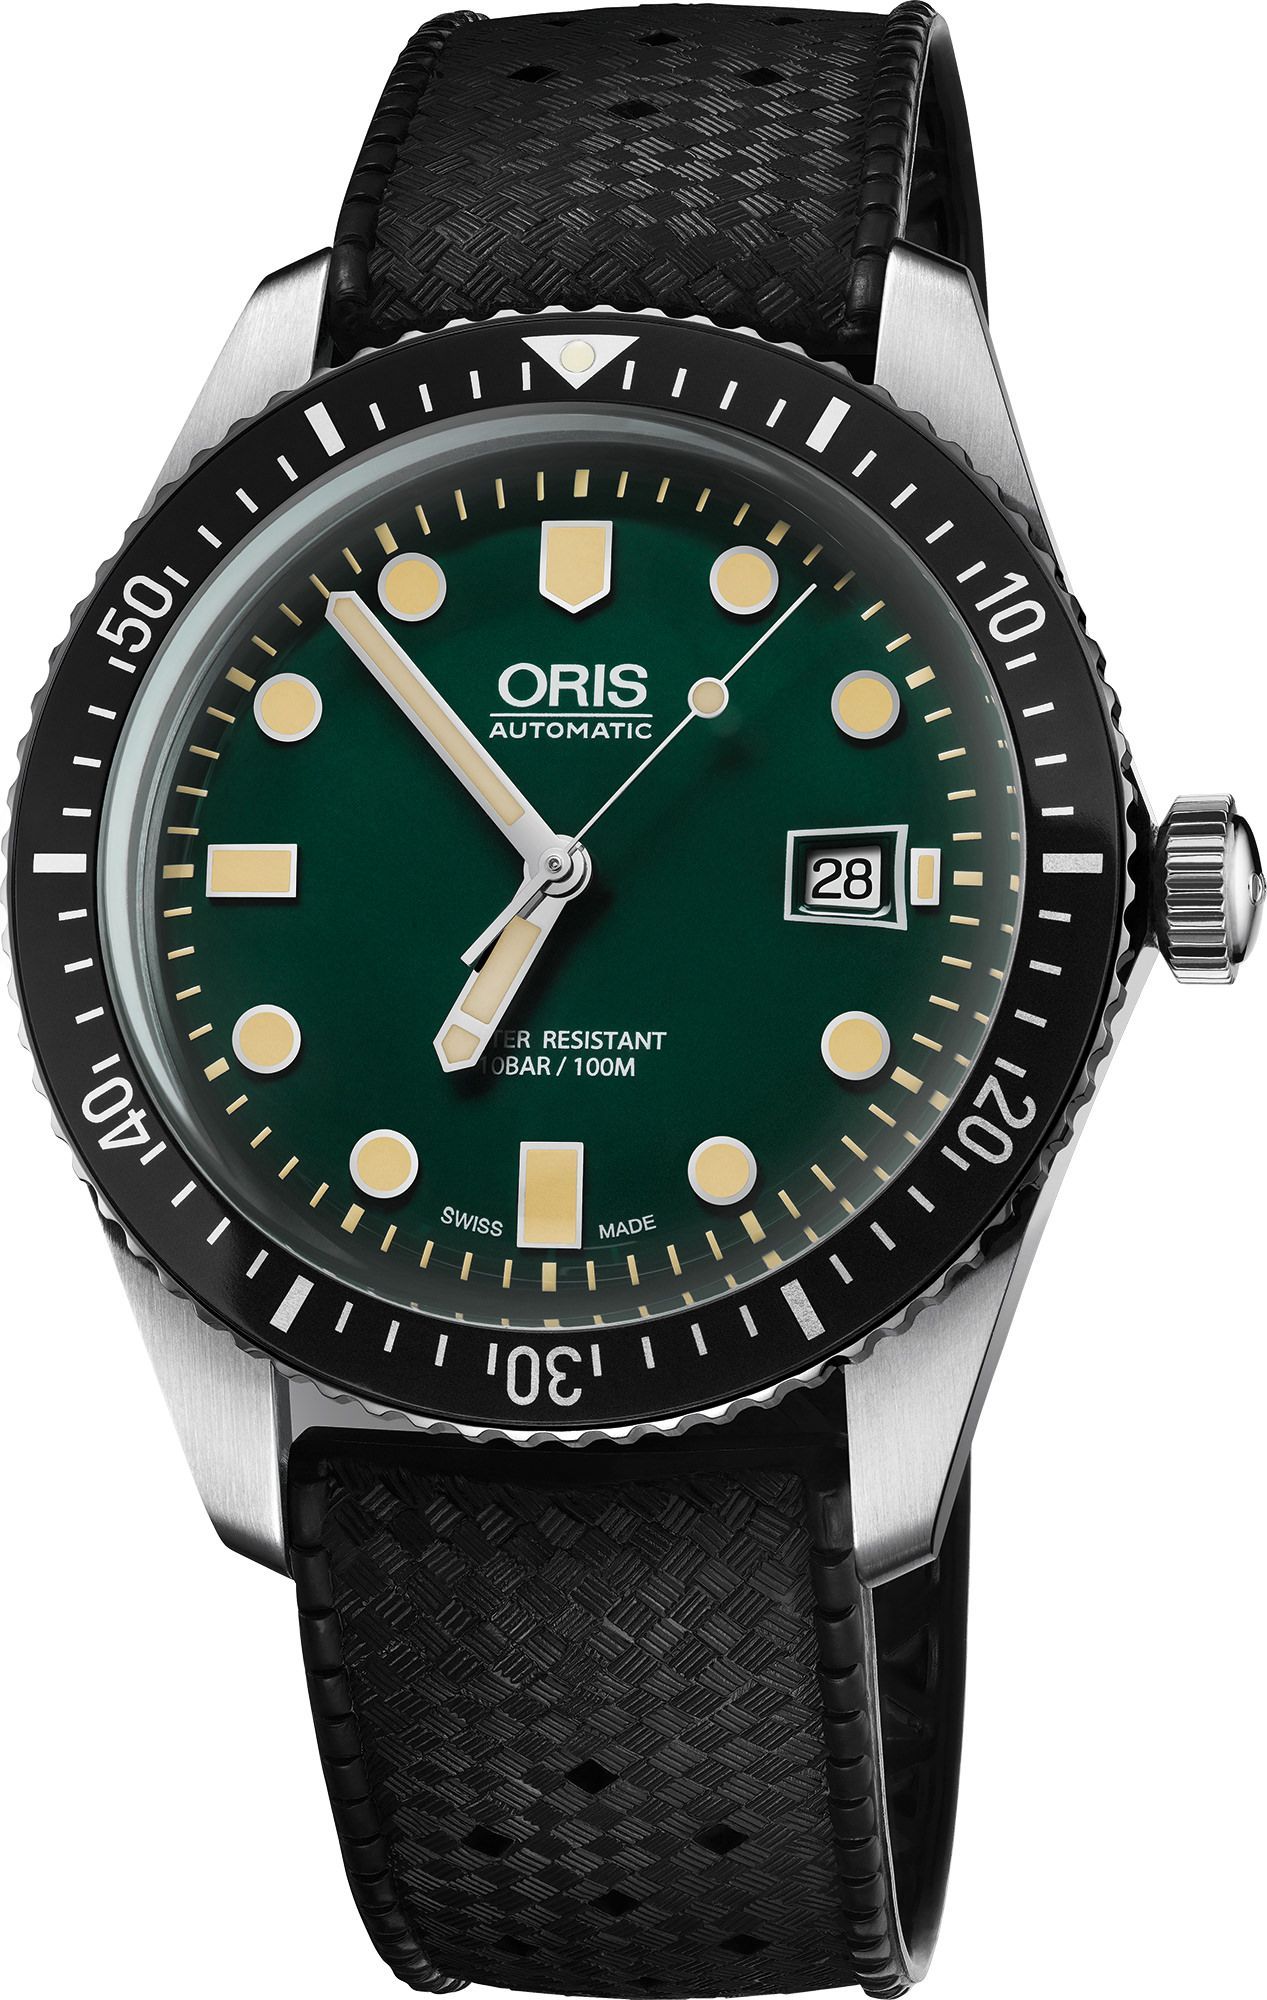 Oris Divers Sixty-Five 42 mm Watch in Green Dial For Men - 1